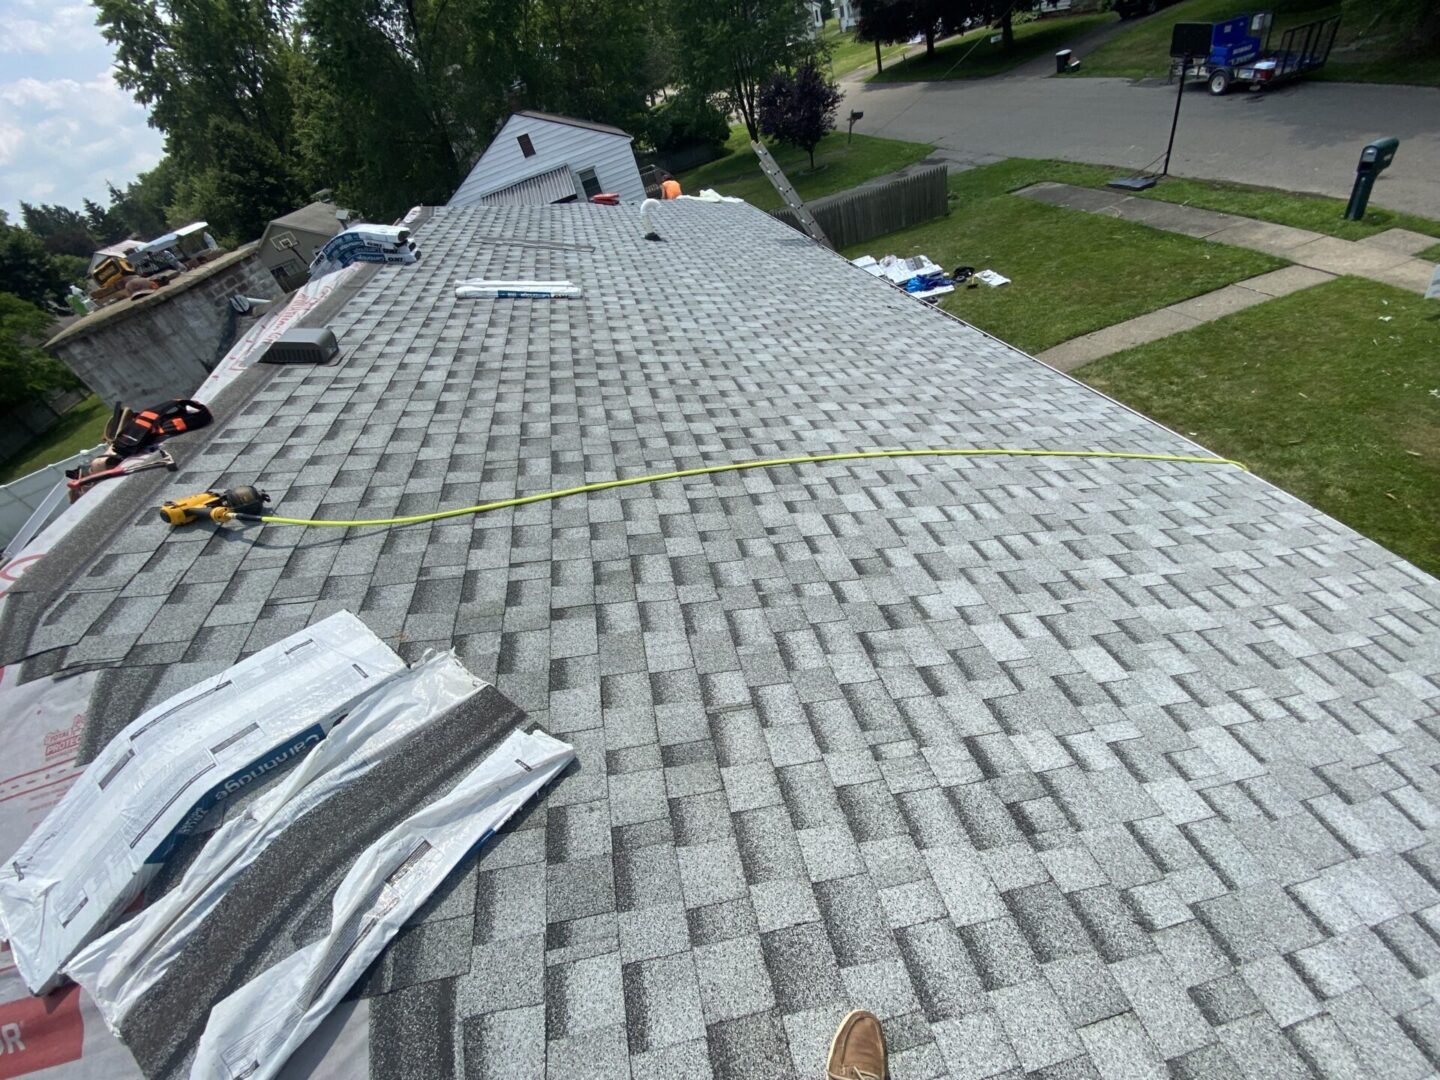 A roof being installed with tape and nails.